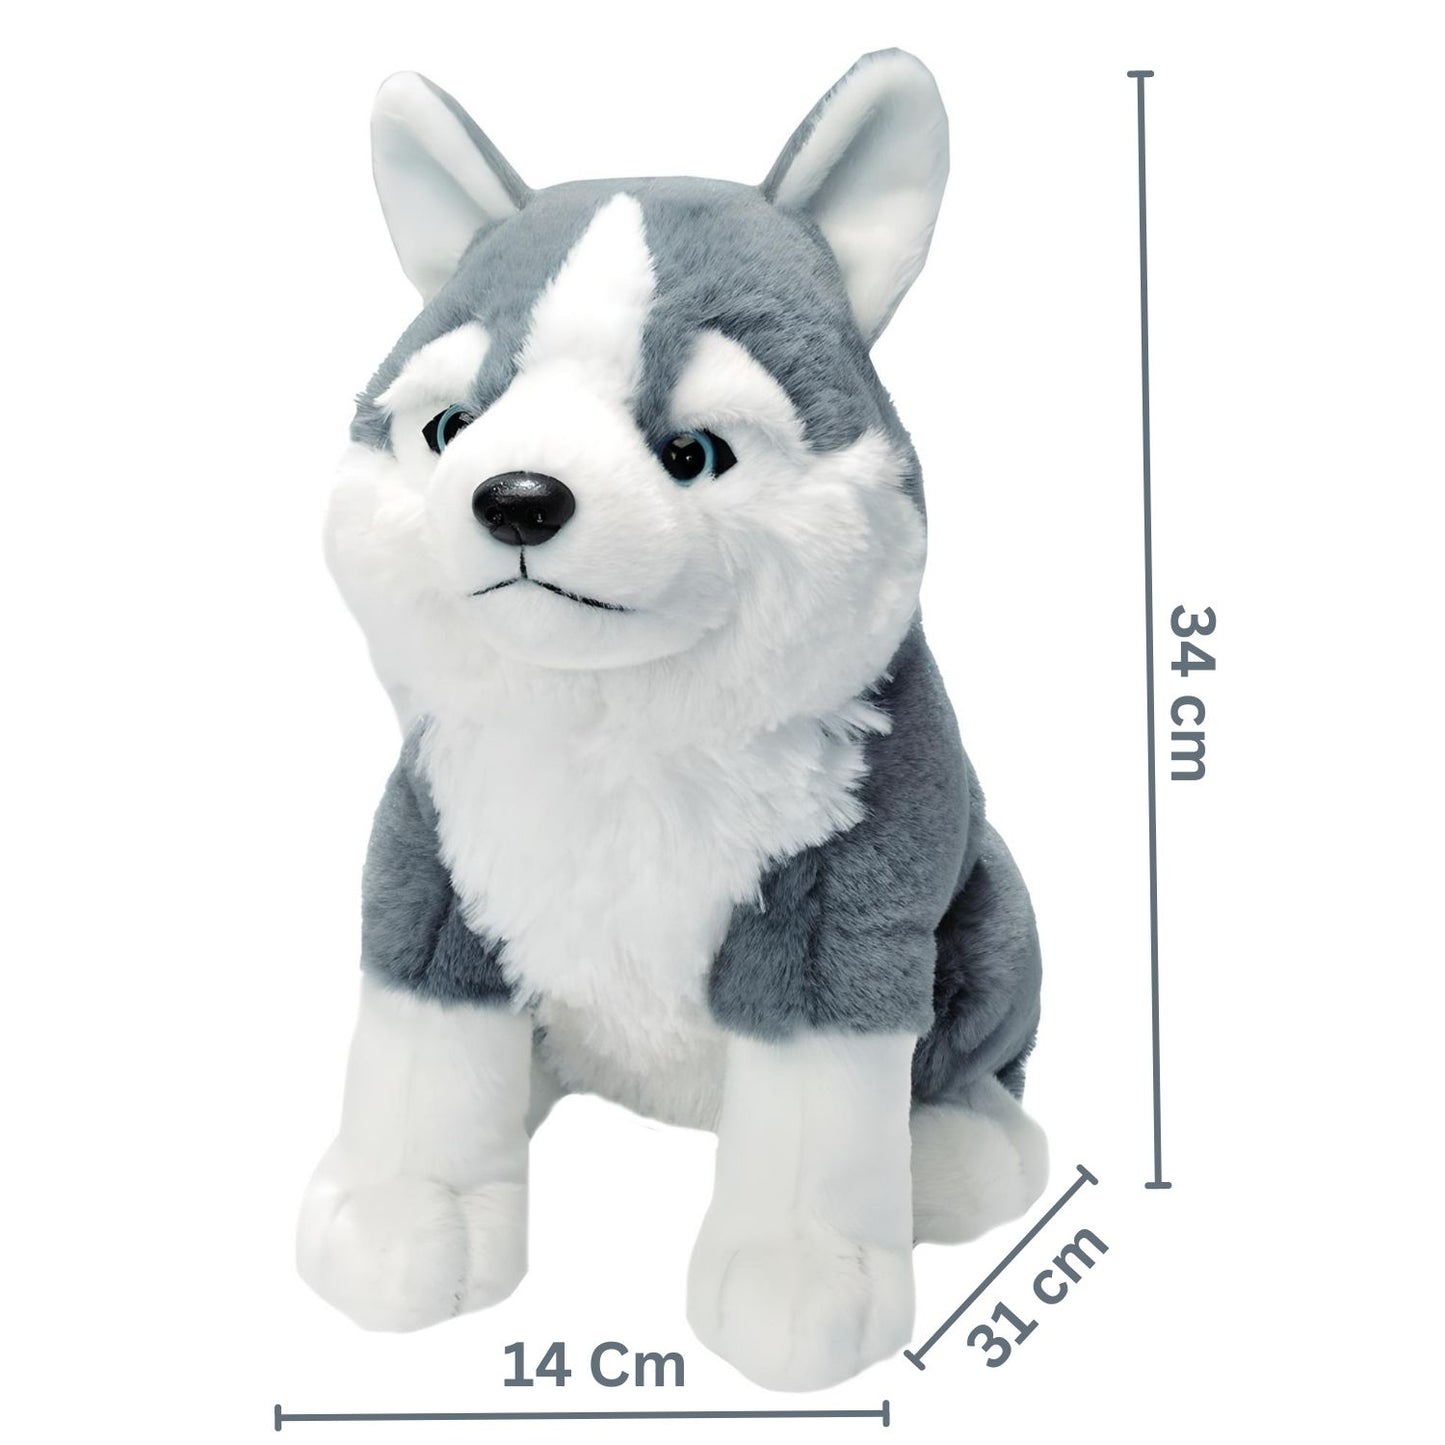 MM TOYS Premium Dog Soft Toy Husky 12 Inch Size Hug n Feel Fabric And Features , Realistic Details | Real Like Dog Soft Toy Gift For Kids, Girls, Adult And Car Décor Or Pets - White/Gray